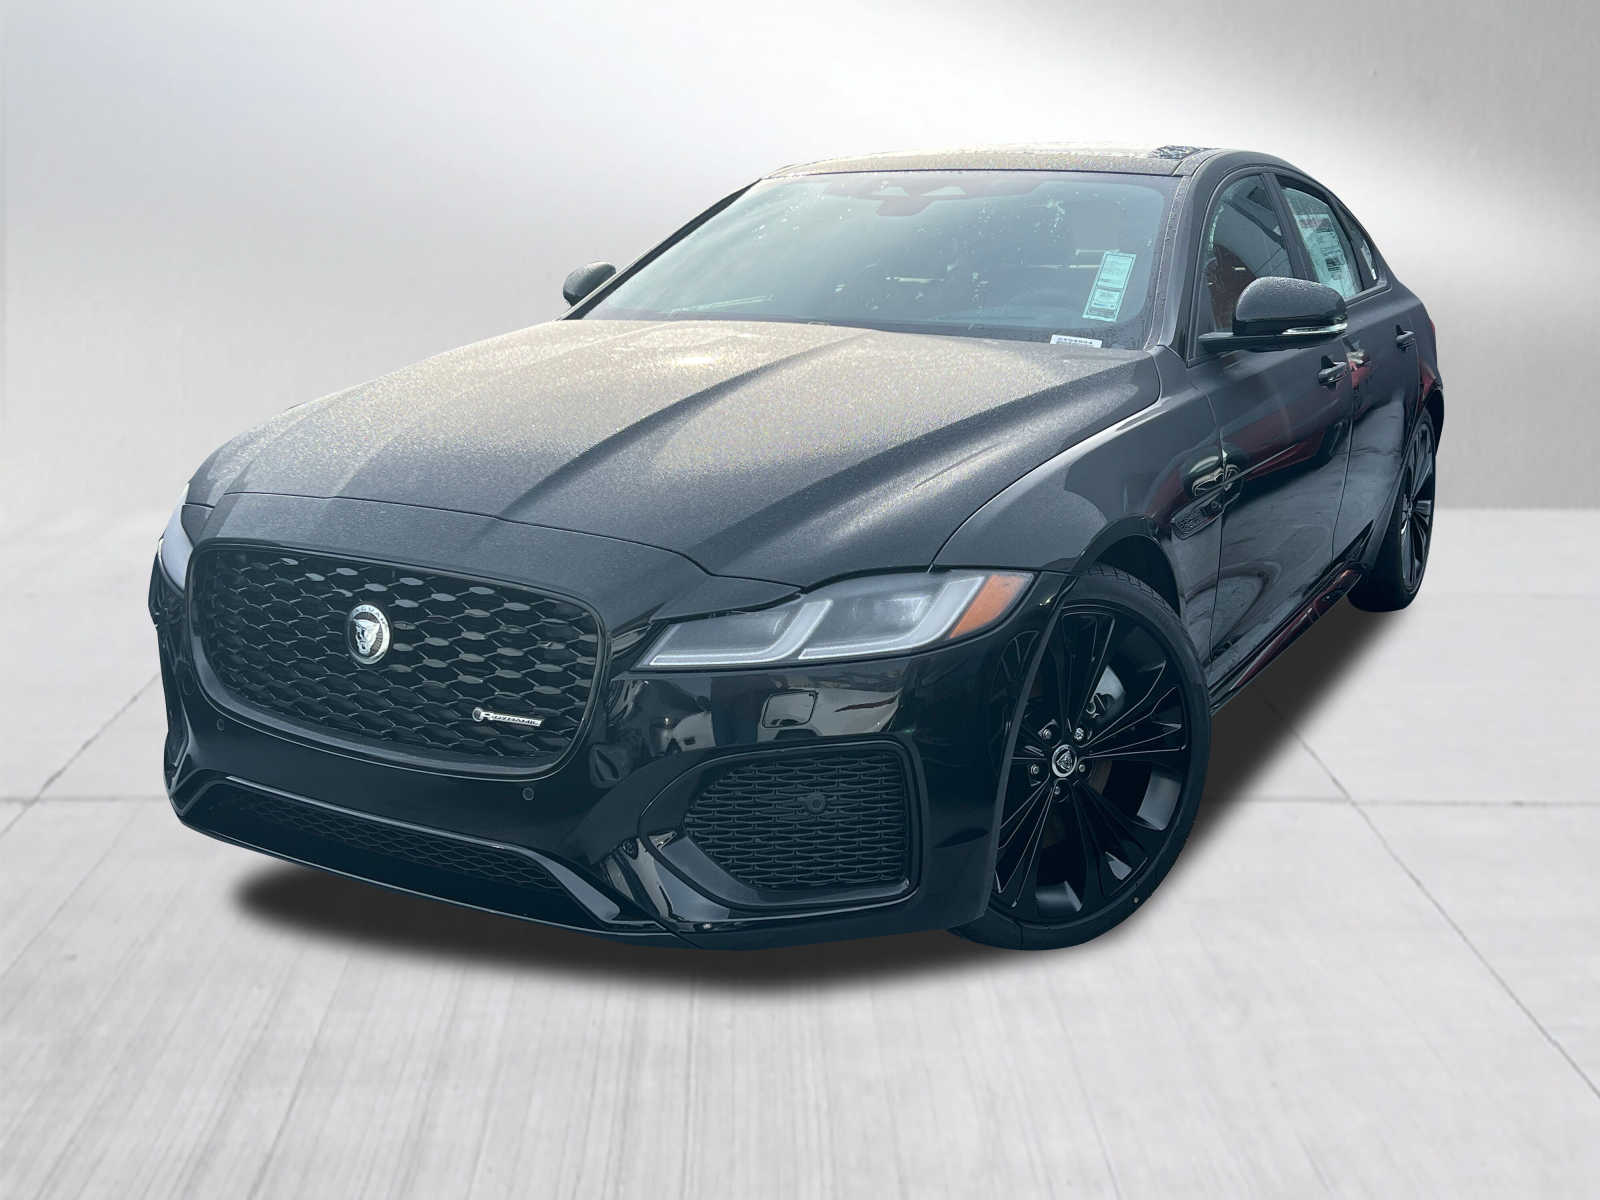 How Much Does the 2021 Jaguar XF Cost?